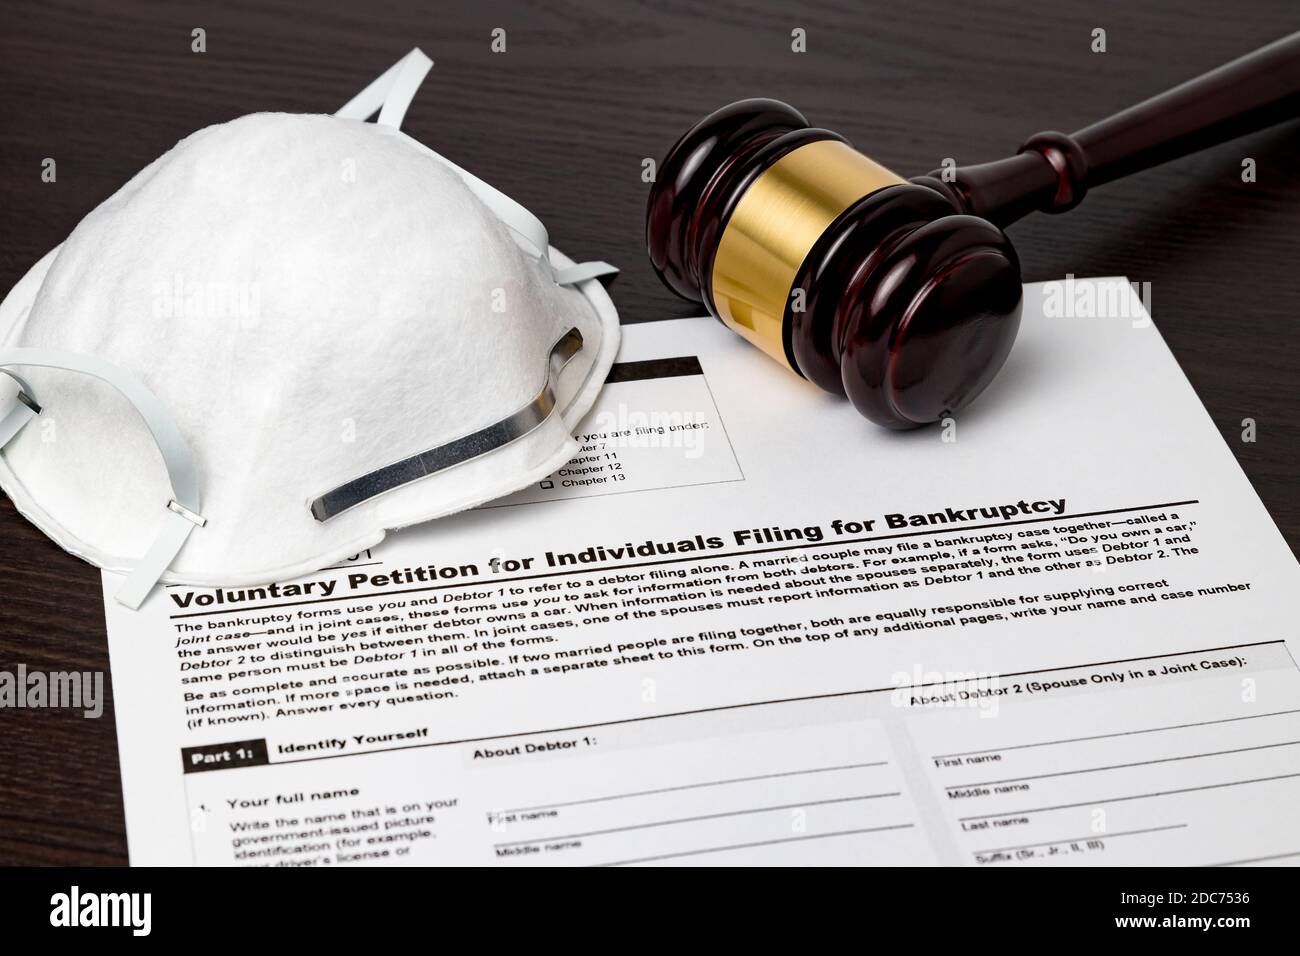 Bankruptcy petition for individuals with gavel and N95 face mask. Concept of financial and unemployment crisis,  debt, economy recession ,pandemic Stock Photo